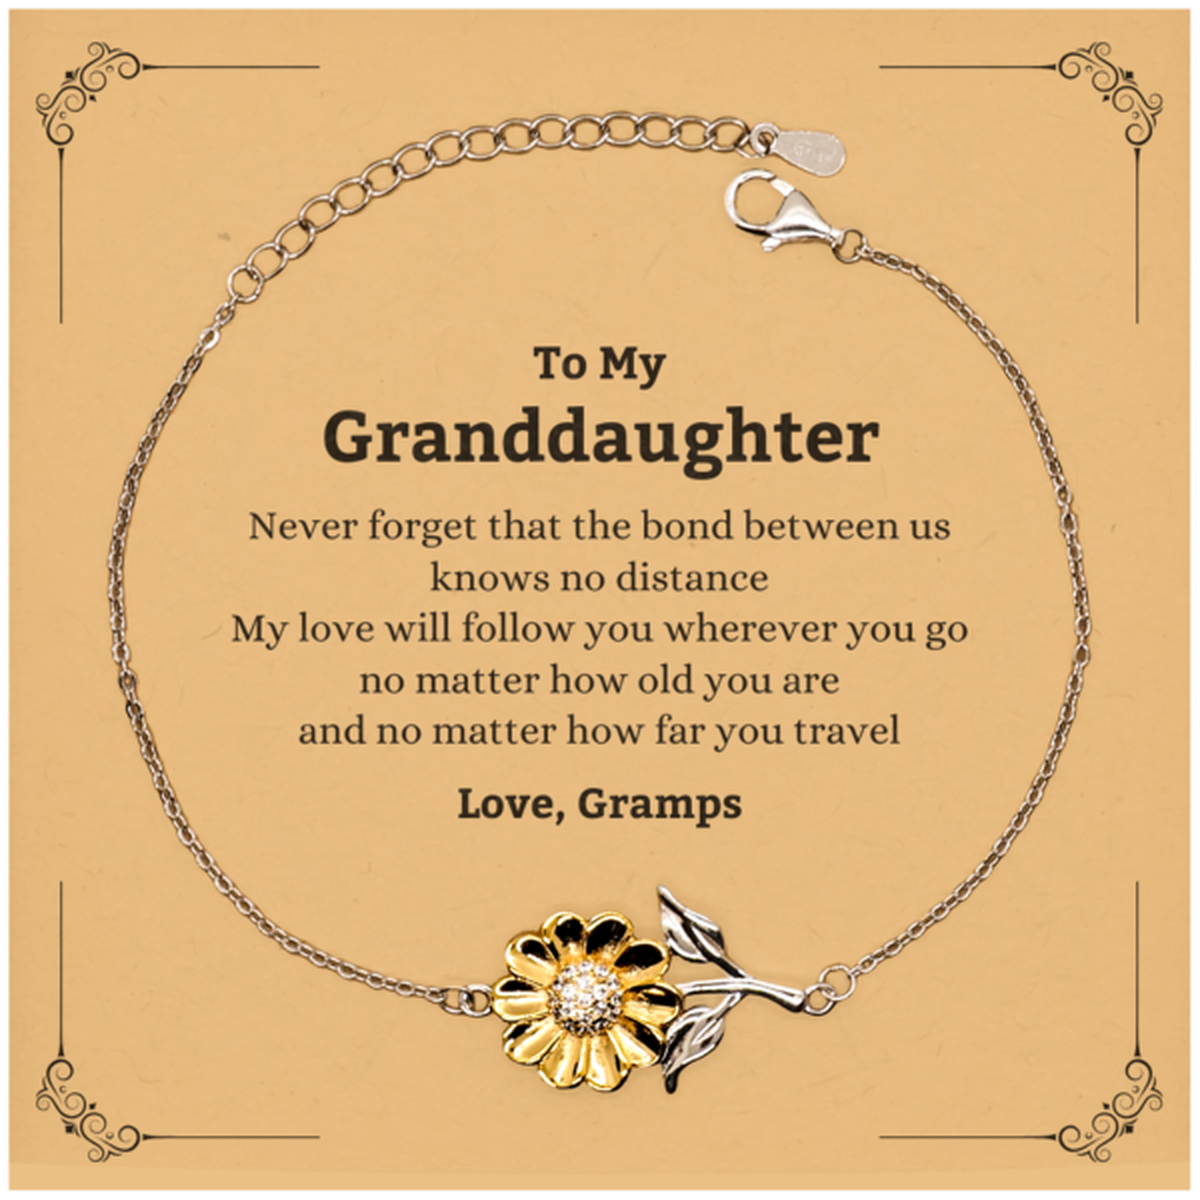 Granddaughter Birthday Gifts from Gramps, Adjustable Sunflower Bracelet for Granddaughter Christmas Graduation Unique Gifts Granddaughter Never forget that the bond between us knows no distance. Love, Gramps